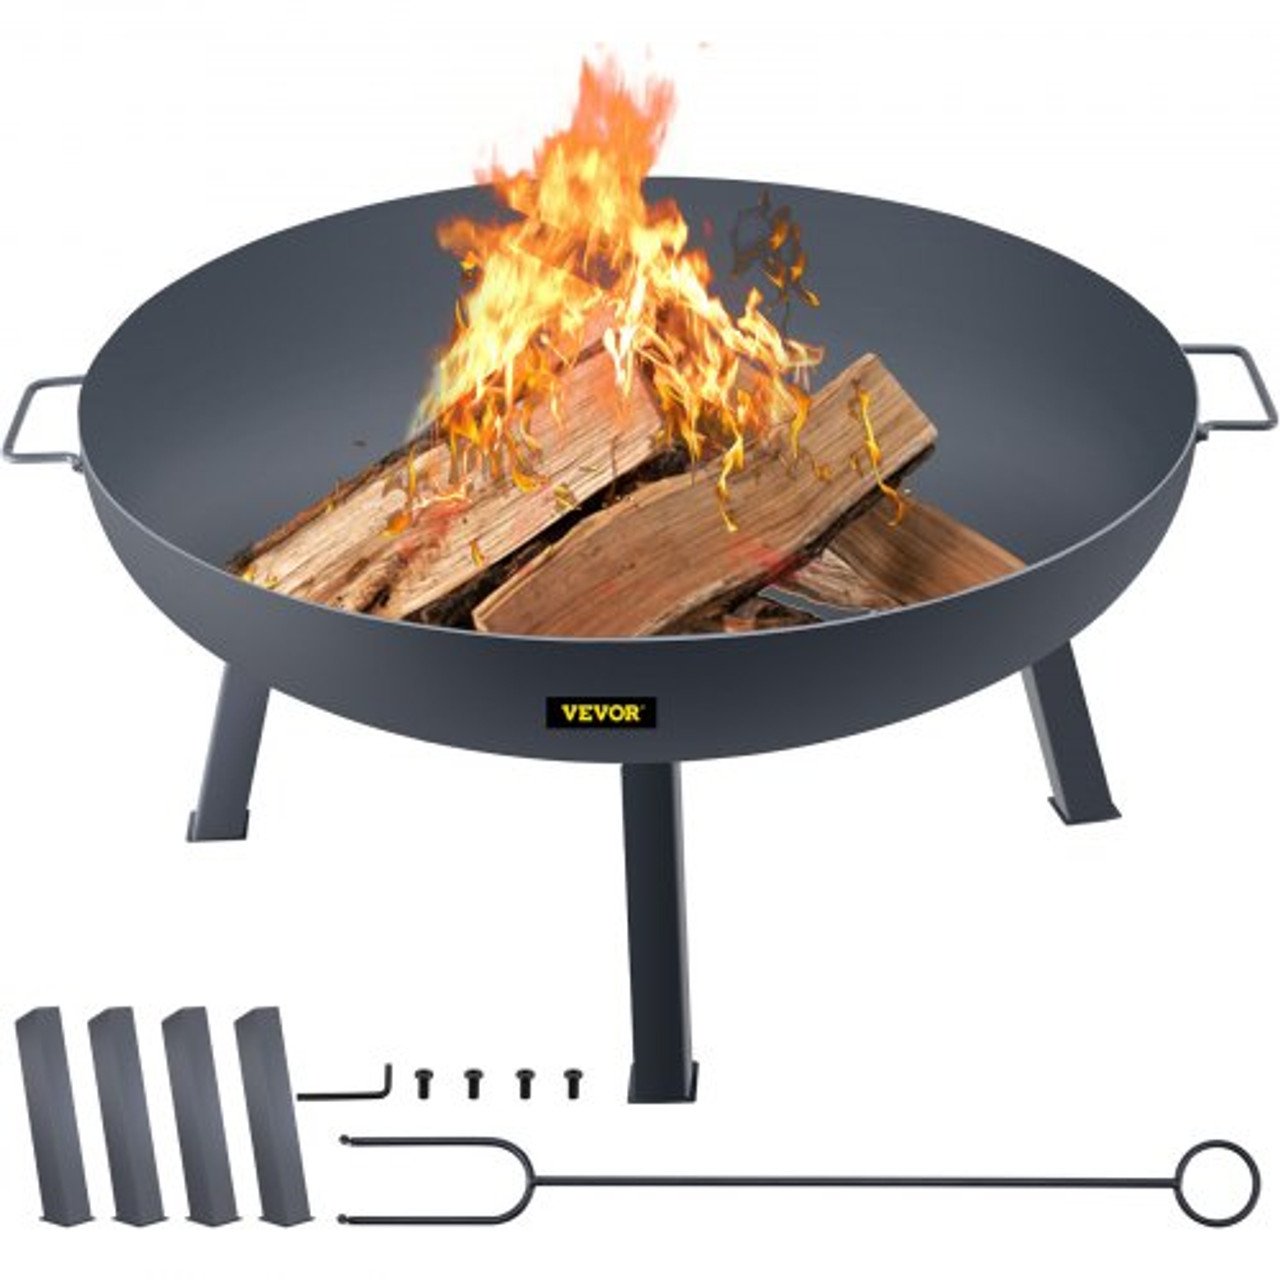 Fire Pit Bowl, 34-Inch Diameter Round Carbon Steel Fire Bowl, Wood Burning for Outdoor Patios, Backyards & Camping Uses, with A Drain Hole, Portable Handles and A Firewood Stick, Black